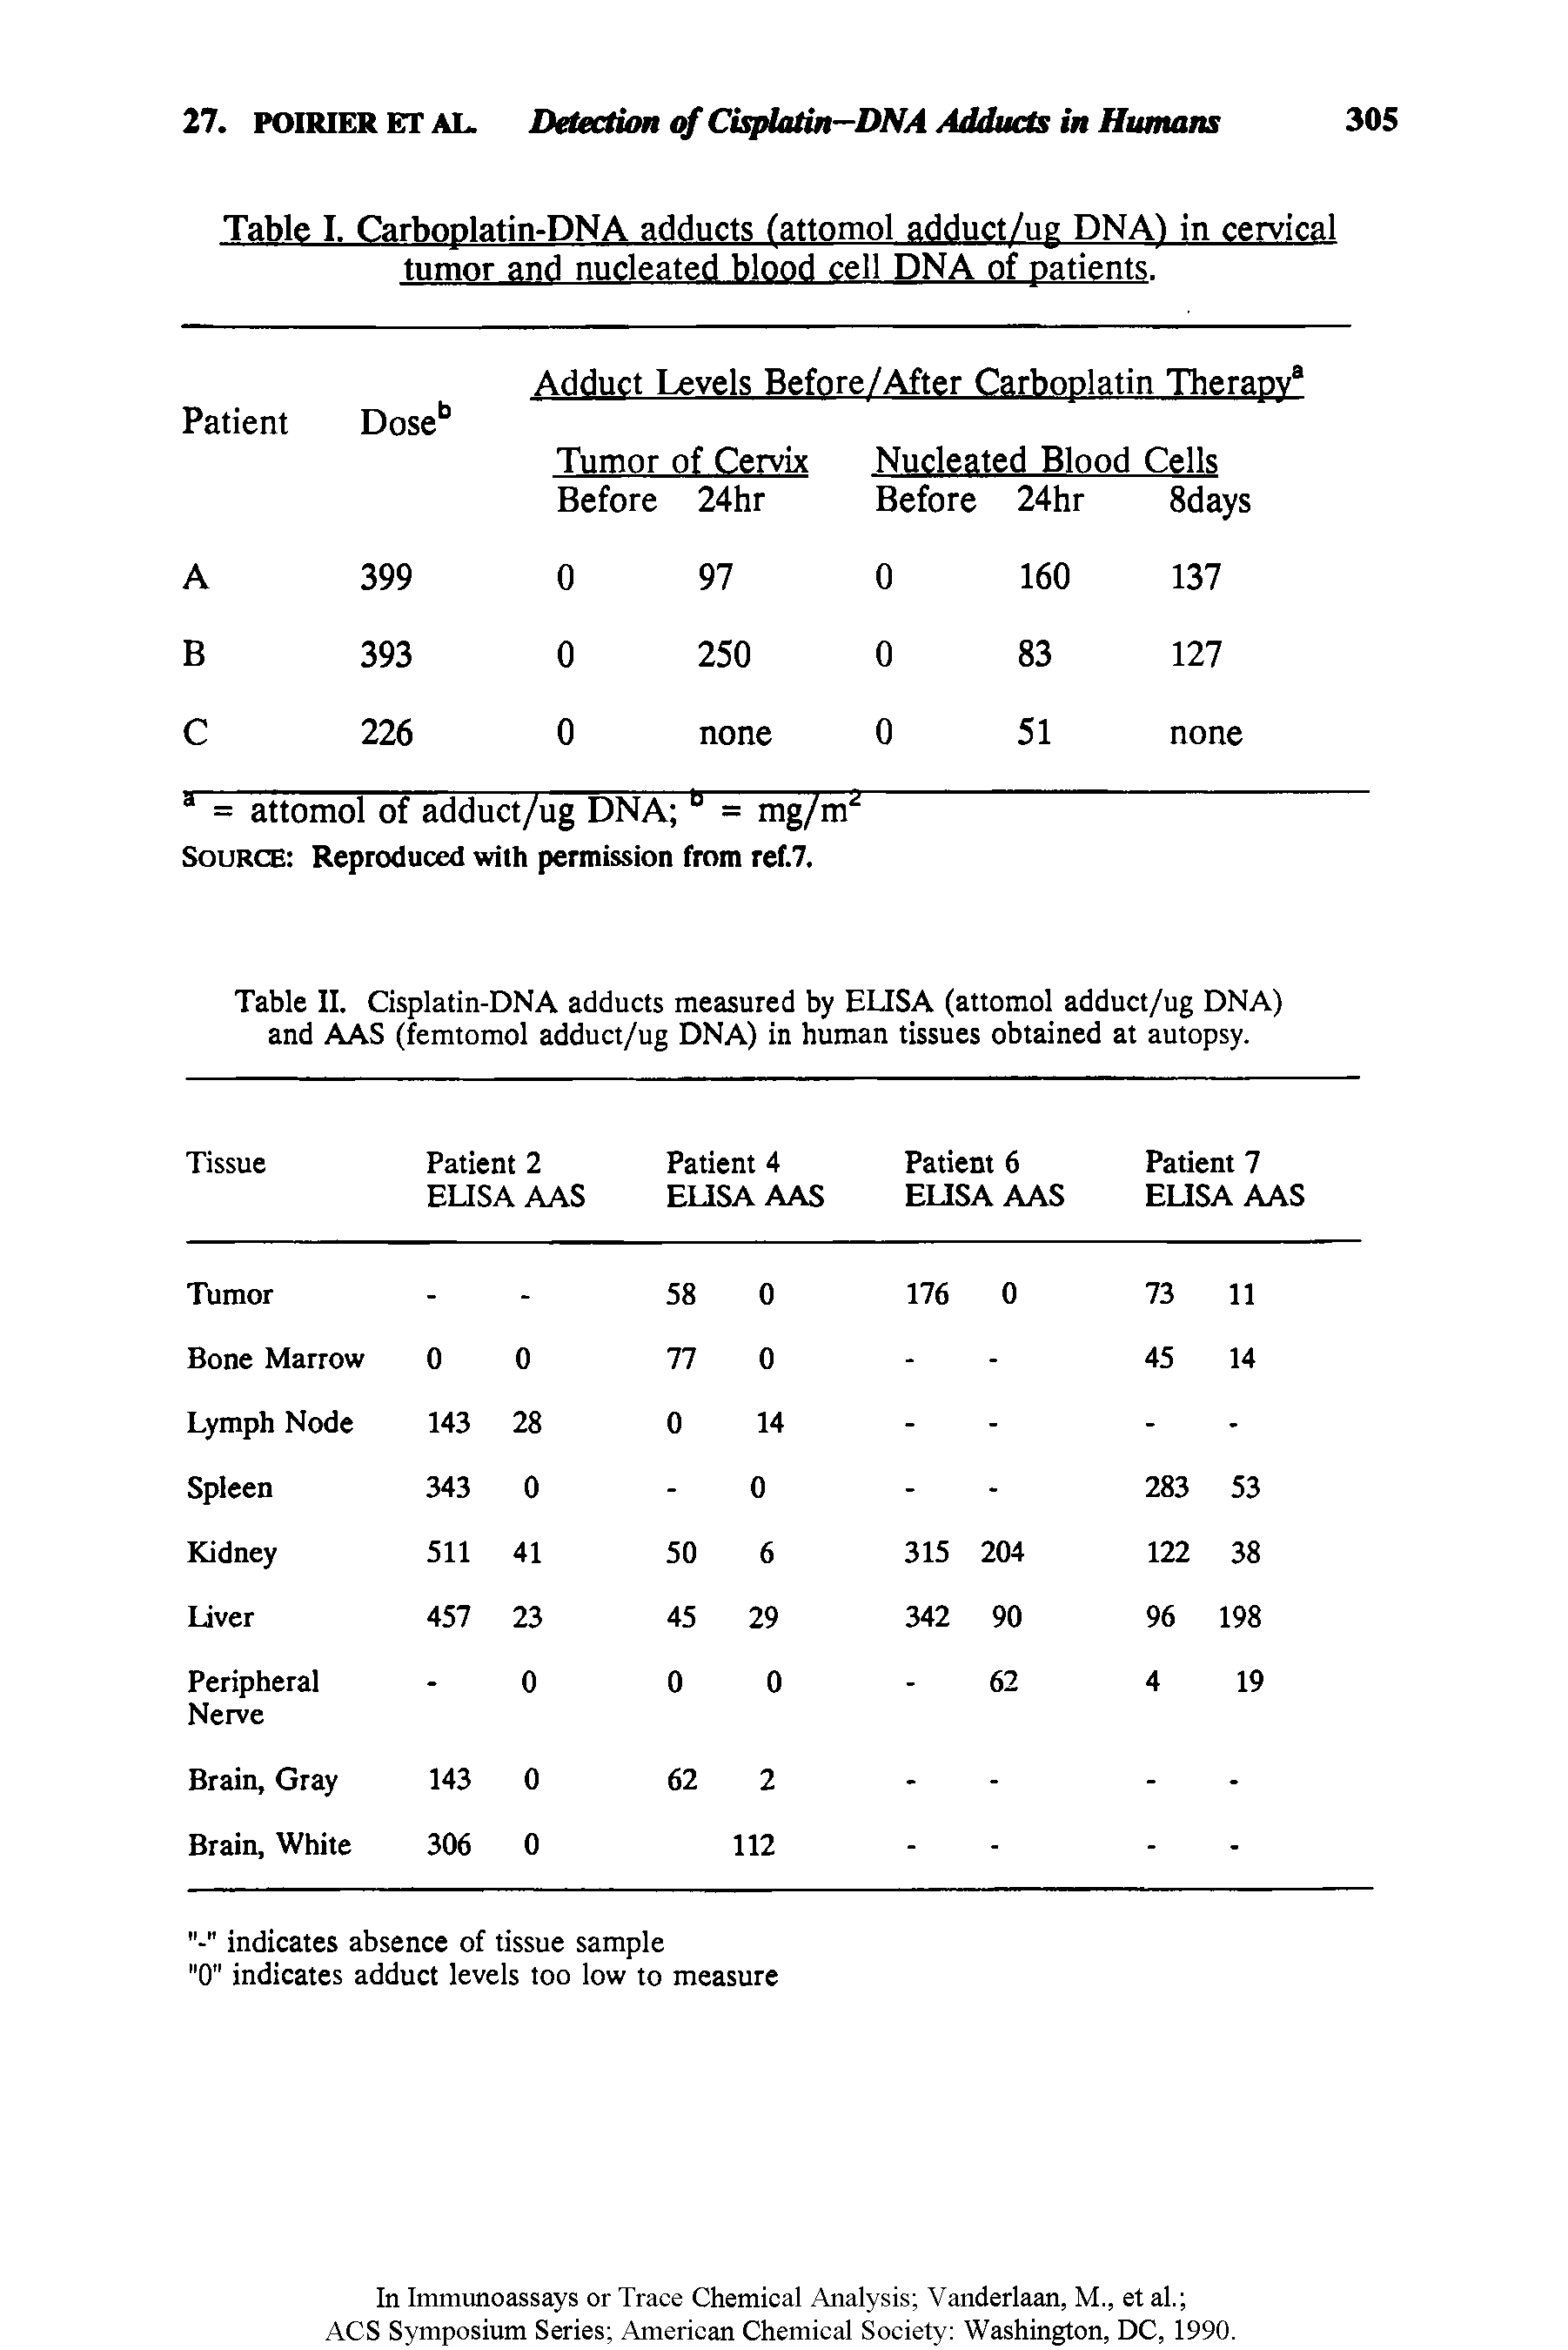 Table II. Cisplatin-DNA adducts measured by ELISA (attomol adduct/ug DNA) and AAS (femtomol adduct/ug DNA) in human tissues obtained at autopsy.